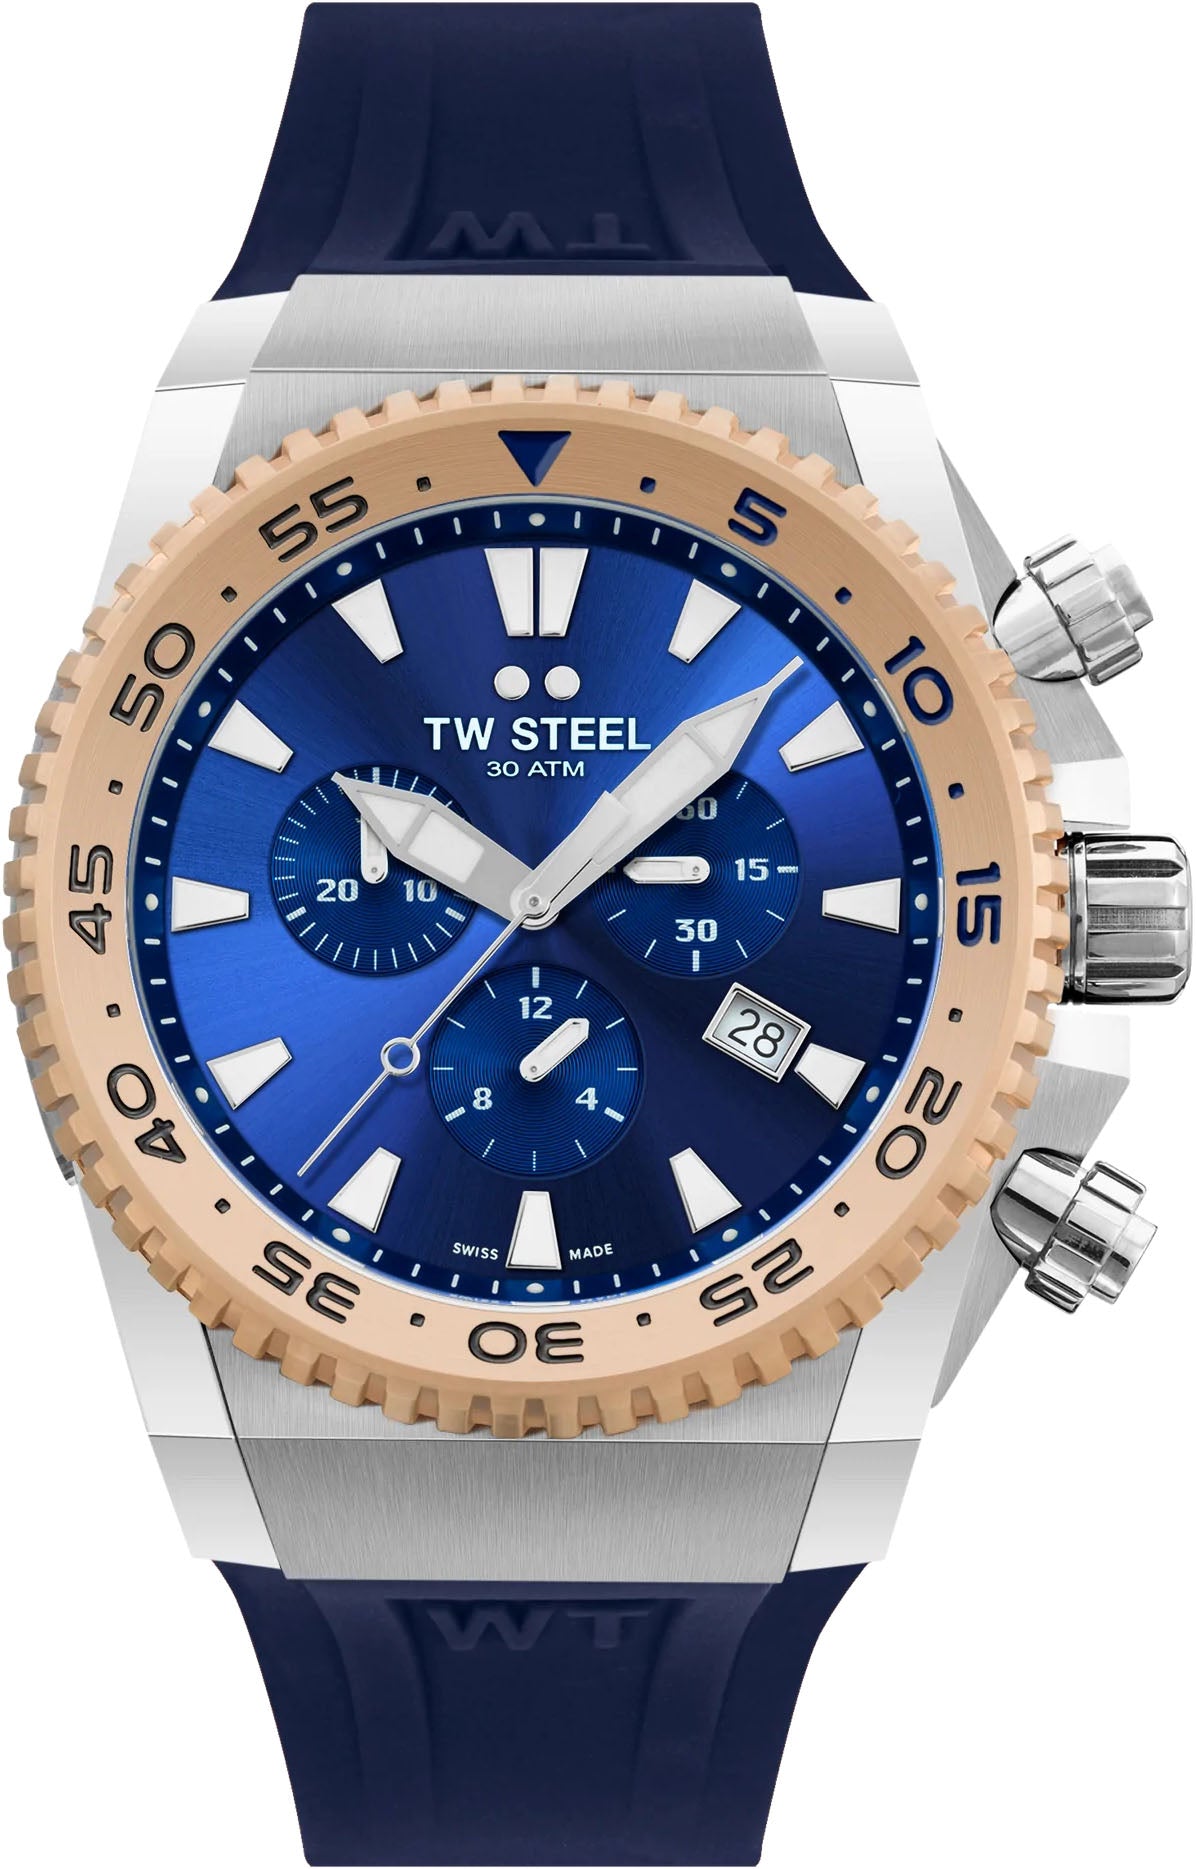 Photos - Wrist Watch TW Steel Watch ACE Diver Limited Edition - Blue TW-660 